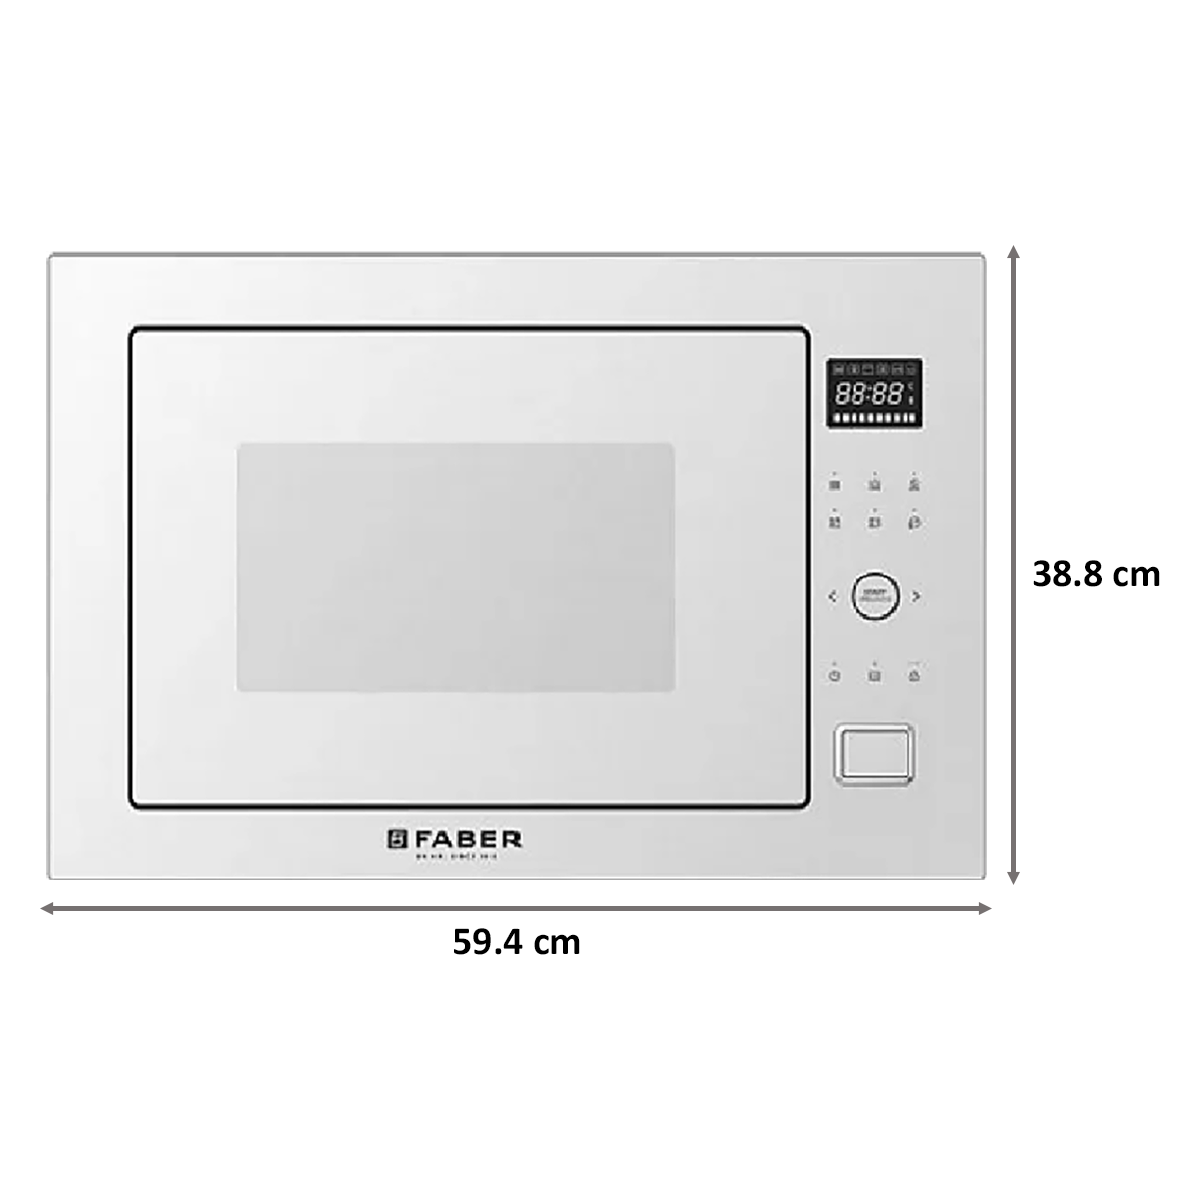 Faber 25 Litres Built-in Microwave Oven (Child Safety Lock, FBIMWO CGS, White)_2